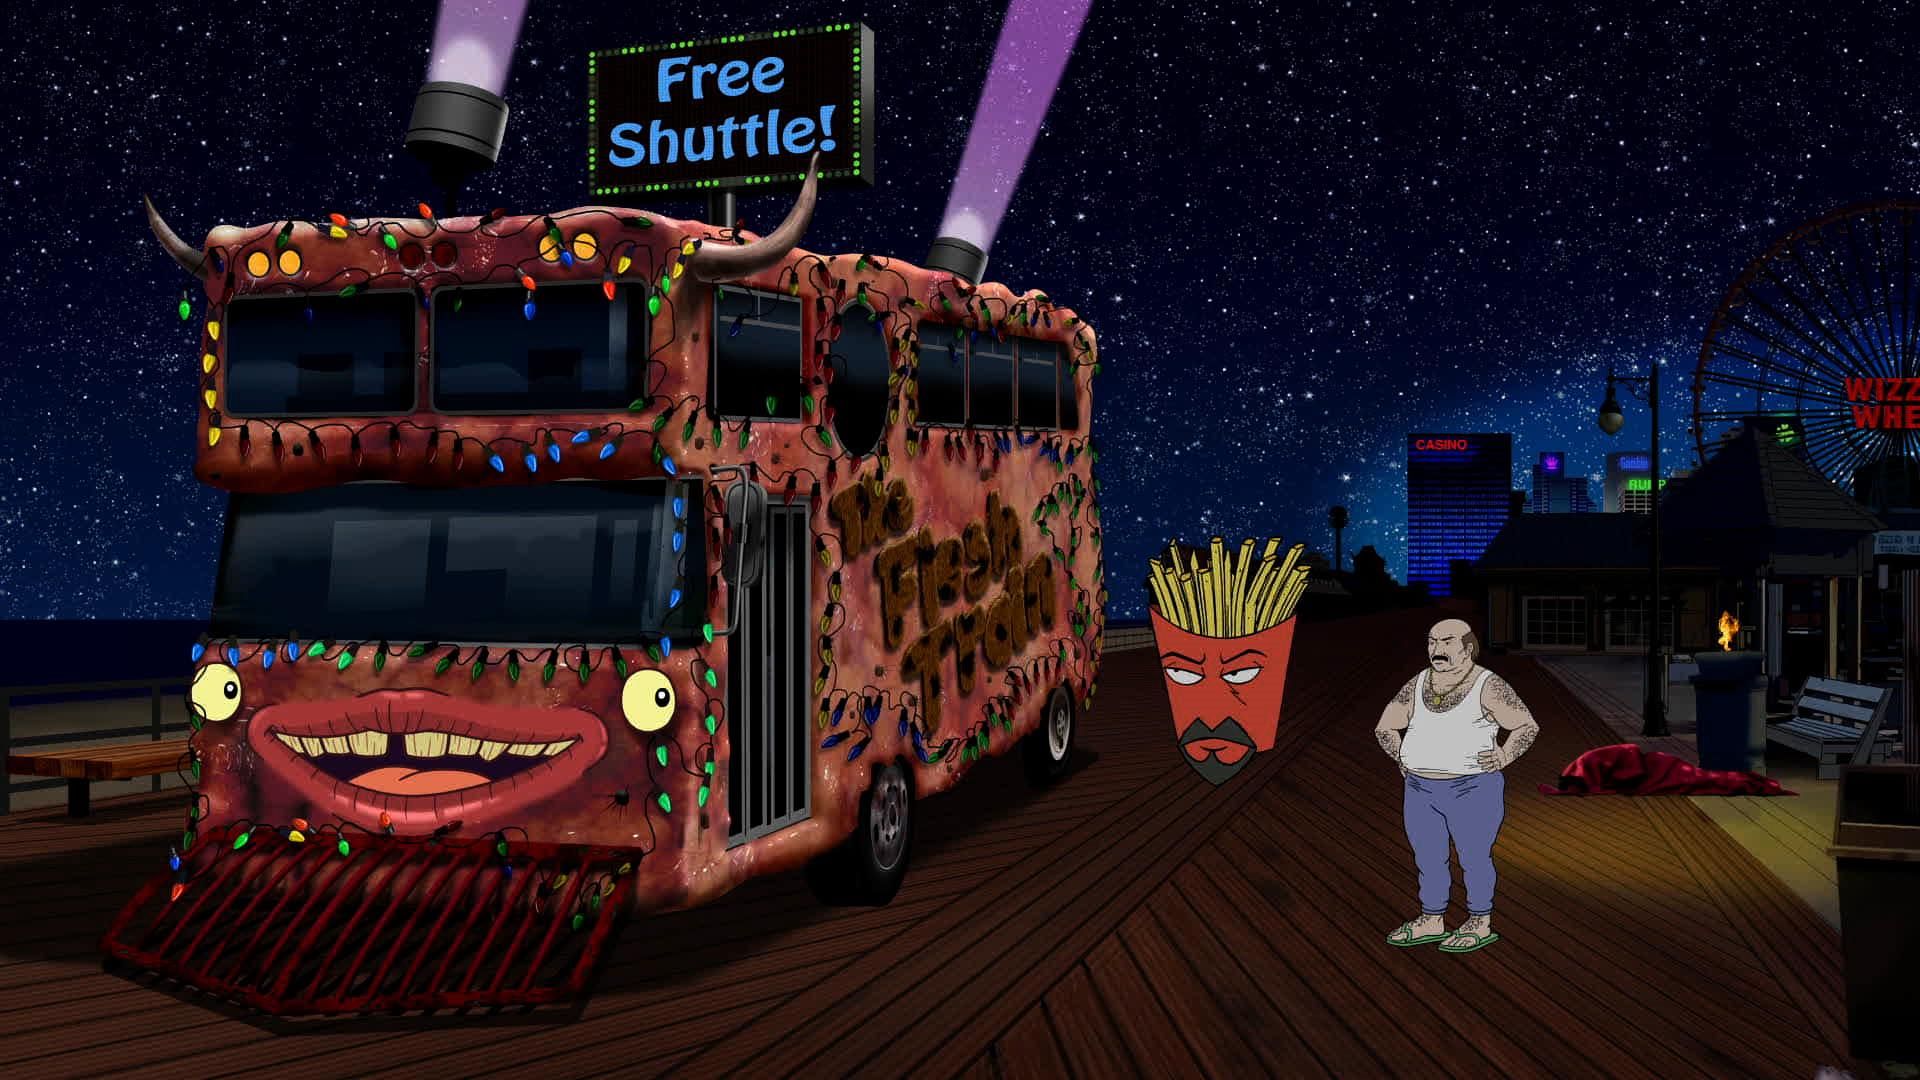 1920px x 1080px - The Hairy Bus - S11 EP3 - Aqua Teen Hunger Force